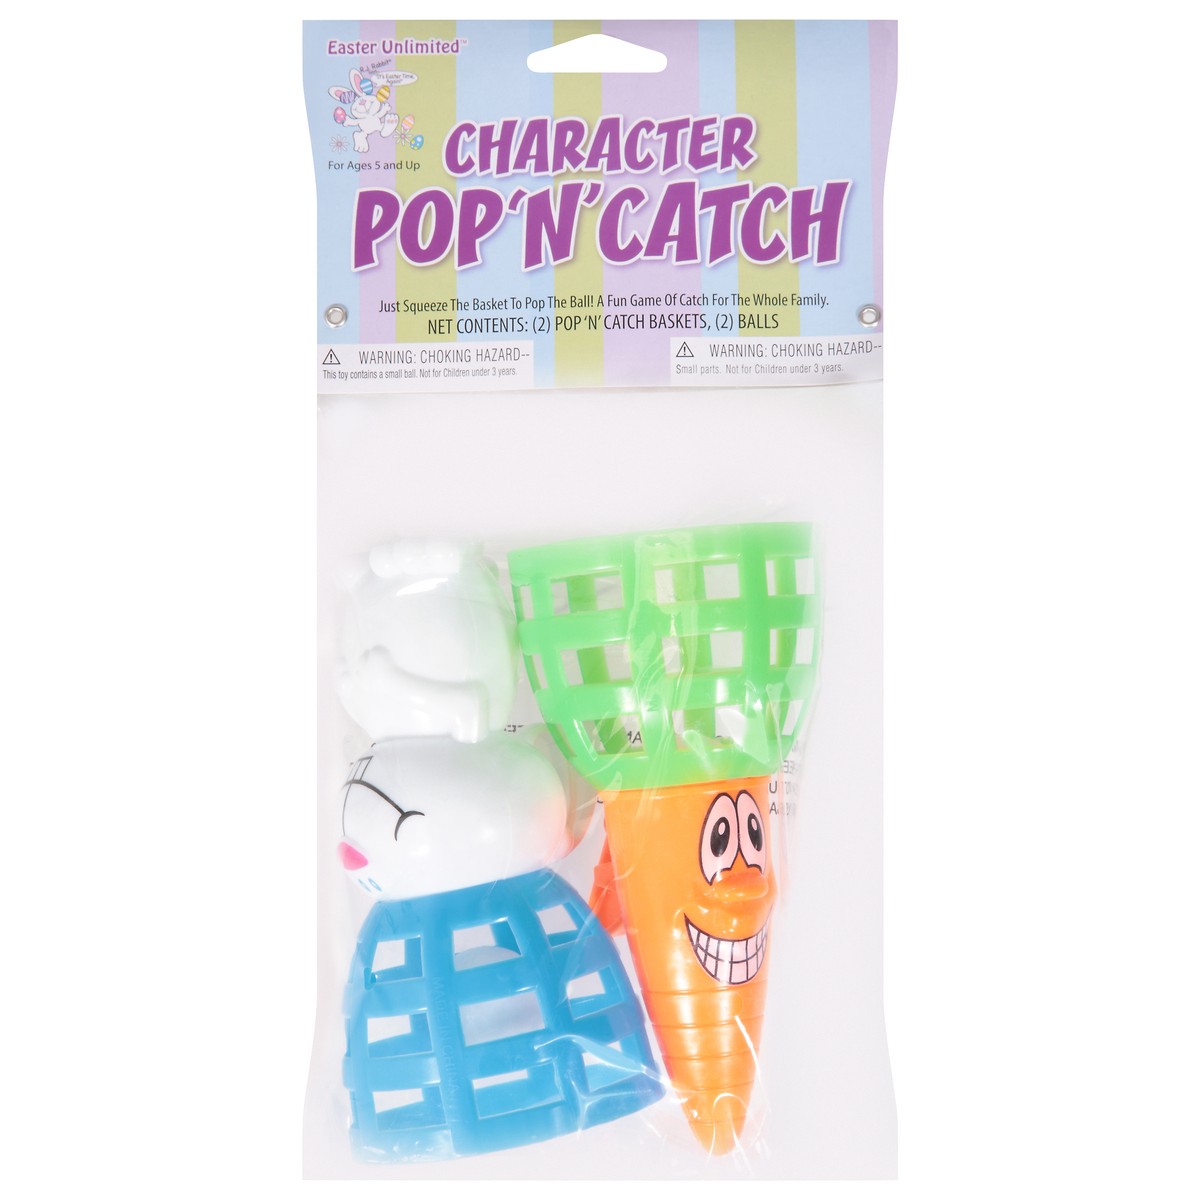 slide 8 of 11, Easter Unlimited Character Pop'n'Catch 4 1 ea, 1 ct